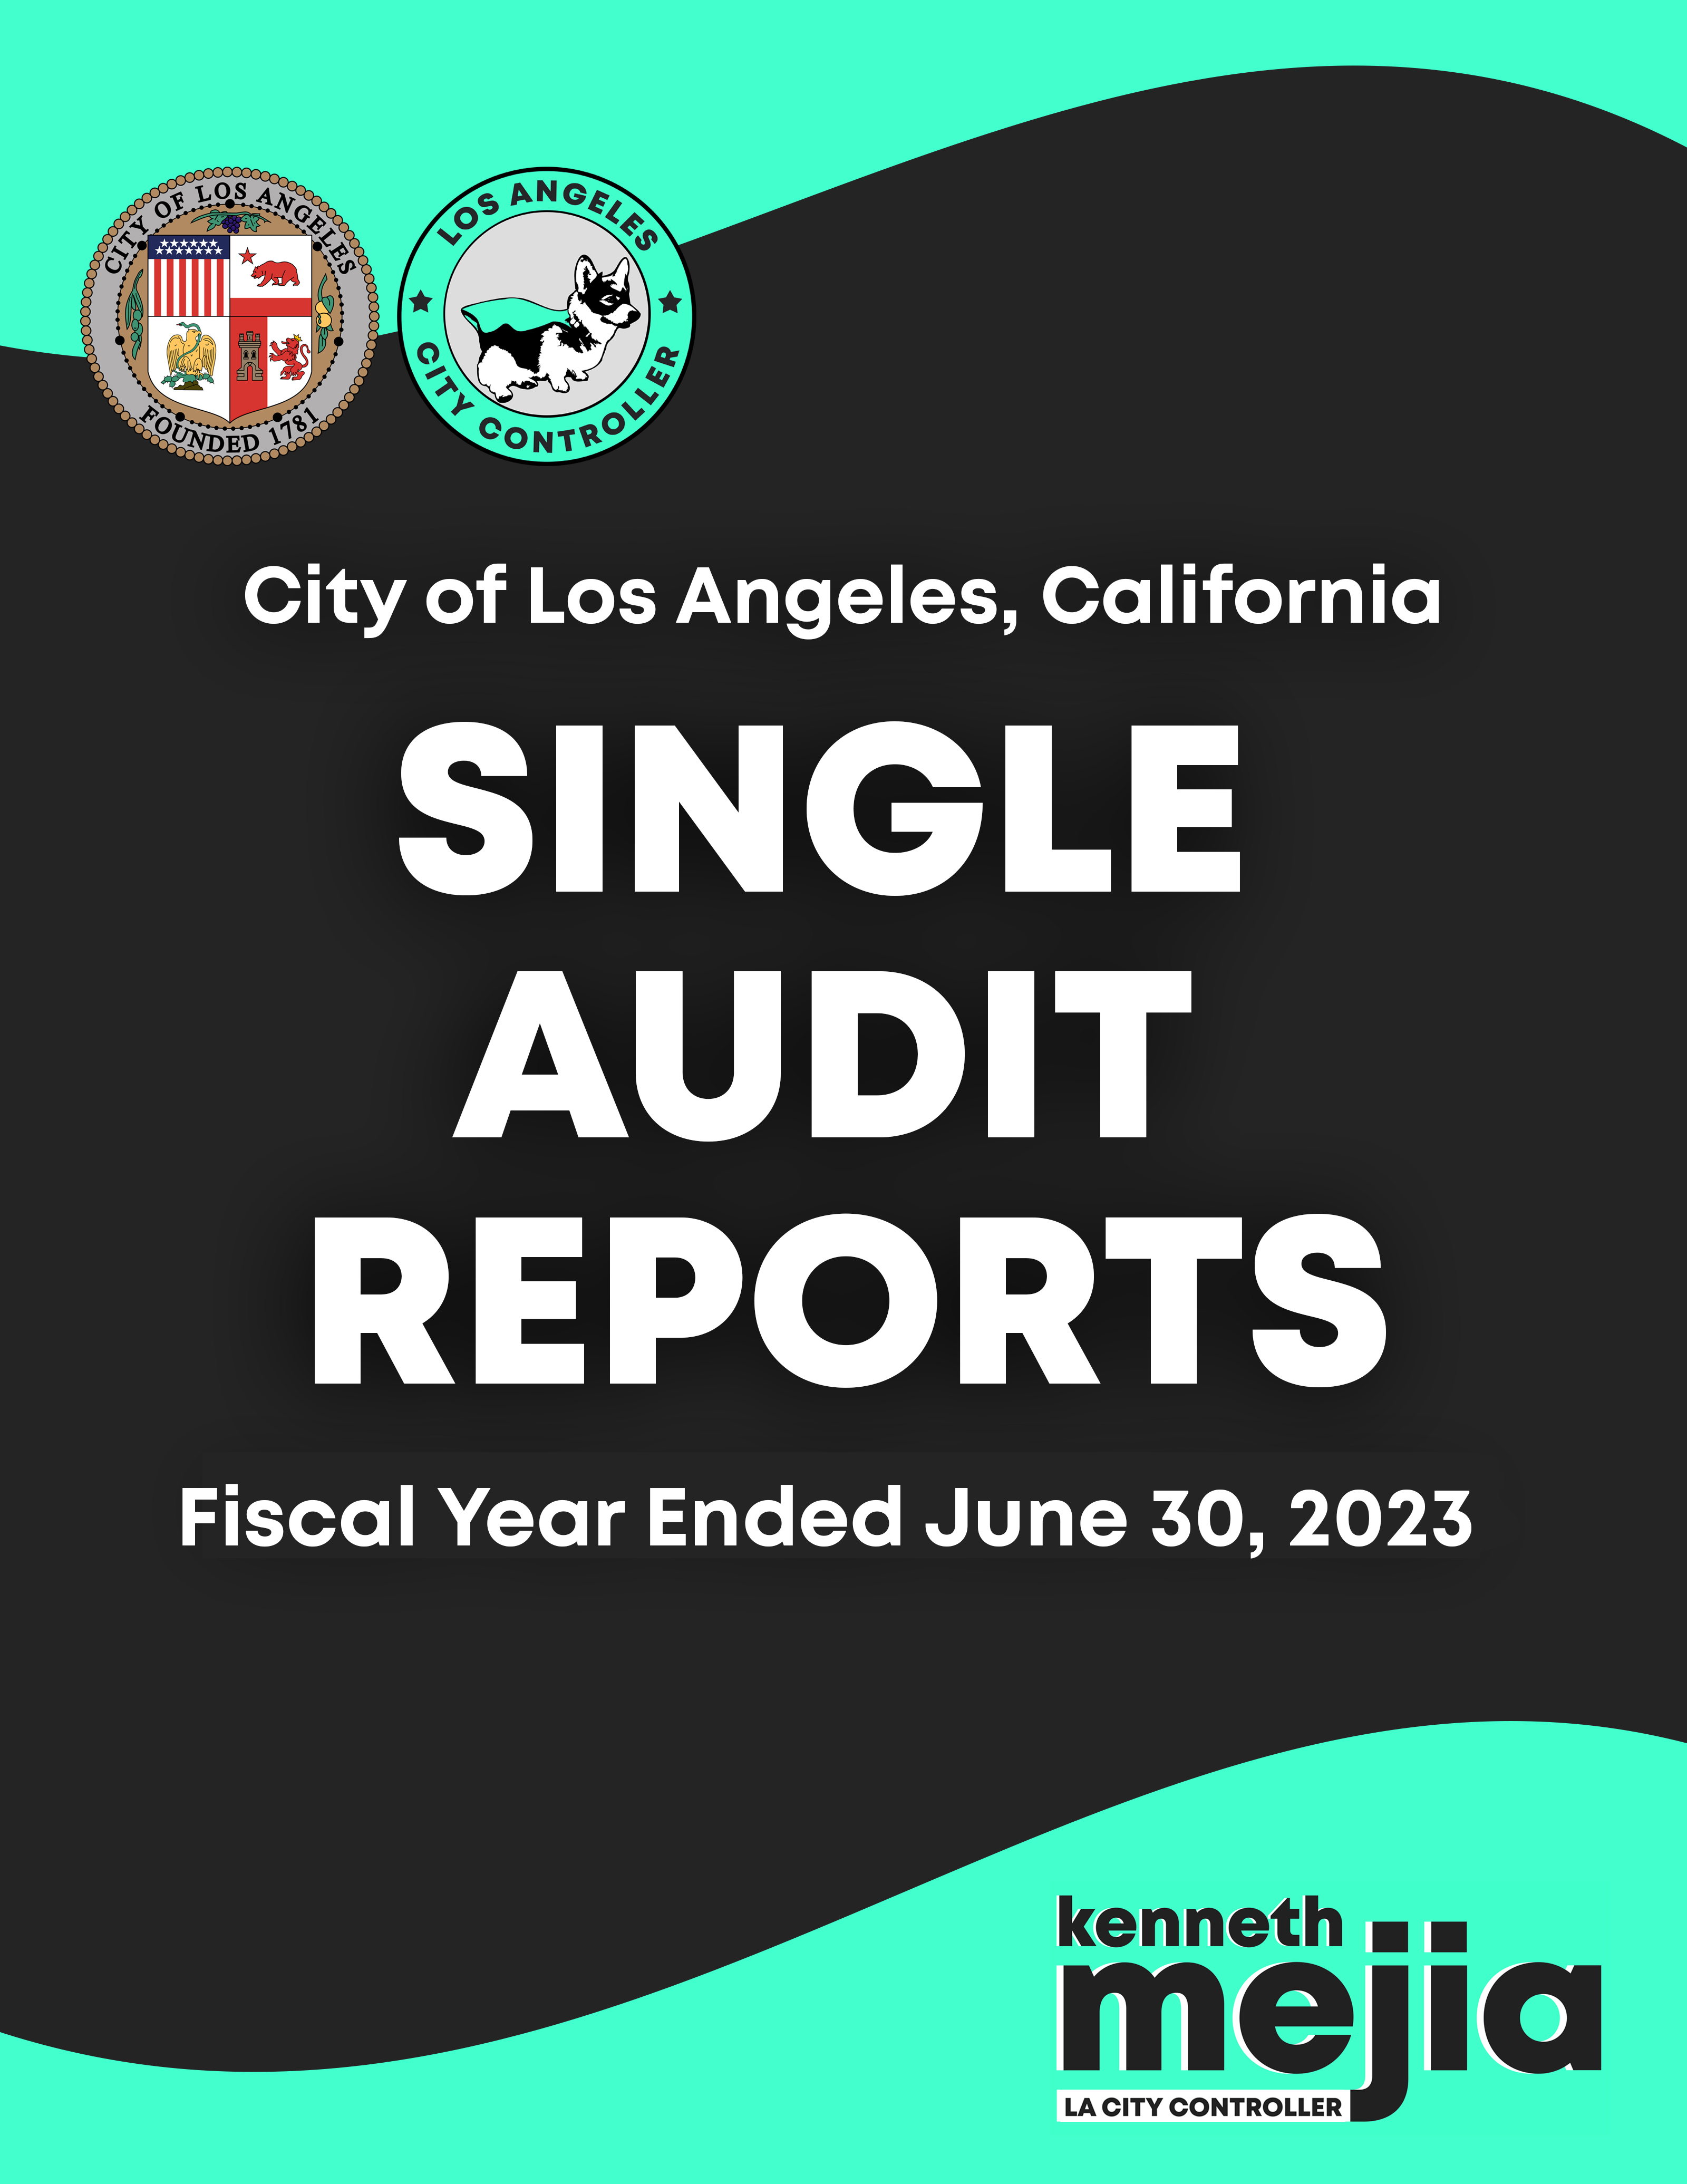 FY 2023 Single Audit Reports